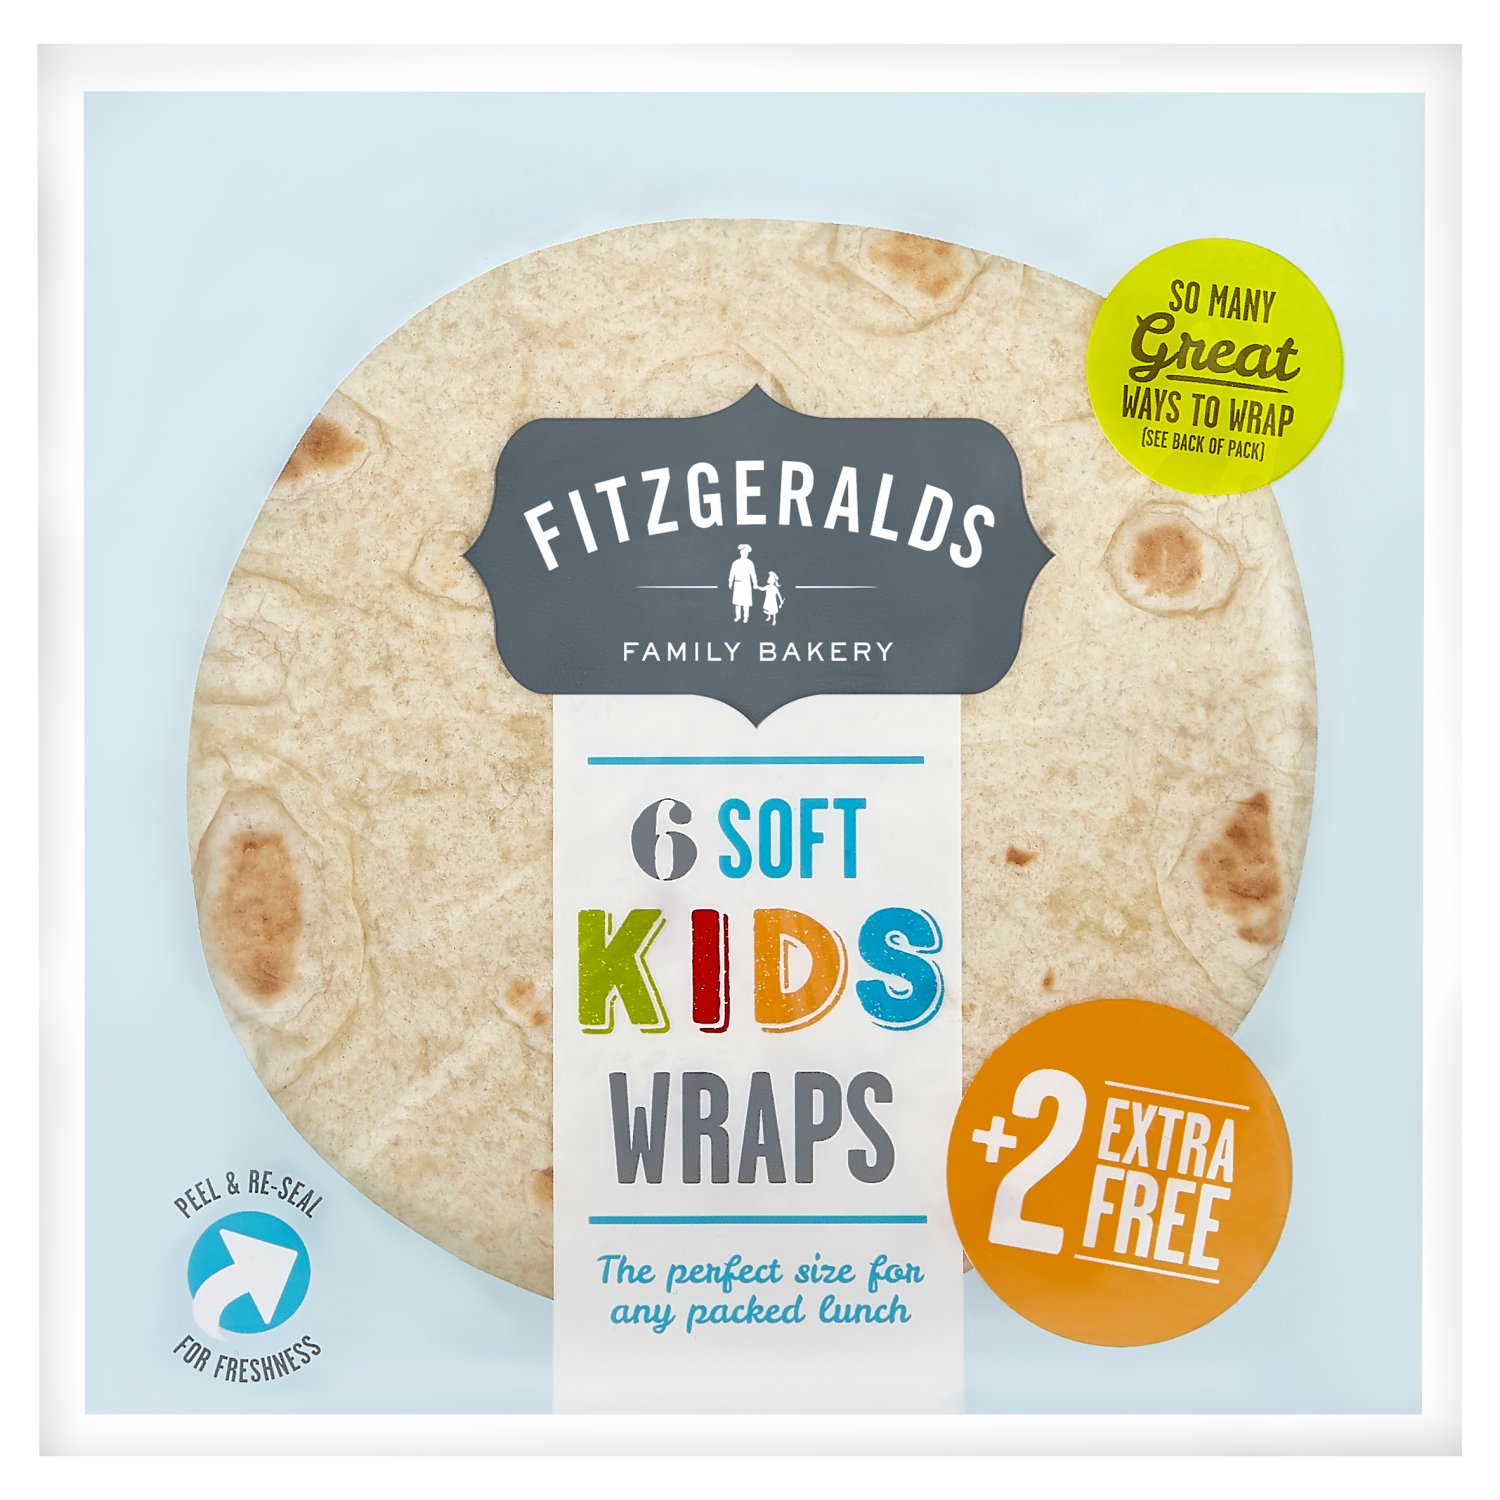 The Classic
Fill your warm wrap with your favourite fillings, the options are limitless!
Quesadillas
Delicious hot filling taste even better when toasted under the grill.
Quesadilla Melts
Perfect sized for fajitas, quesadillas and burritos.